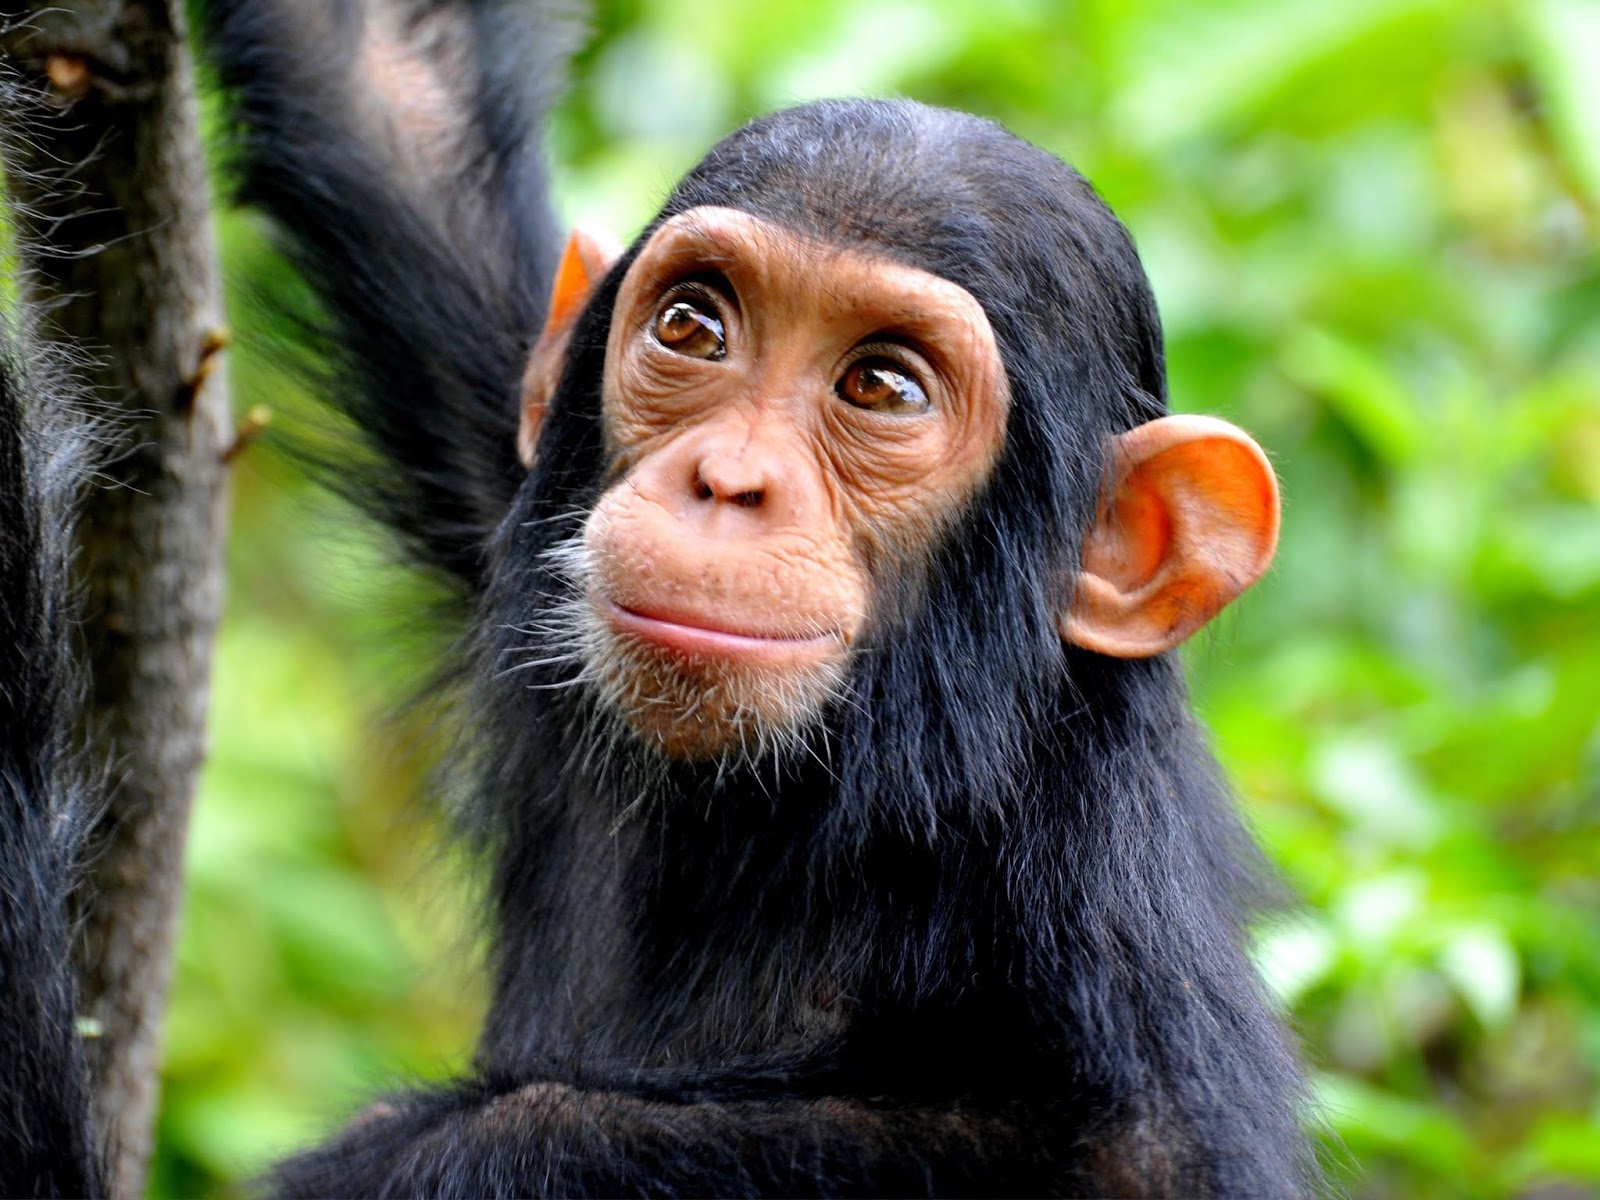 high-angle-view-of-chimpanzee-in-forest-769784687-5b1e76d63de4230037ce6f9d.jpg